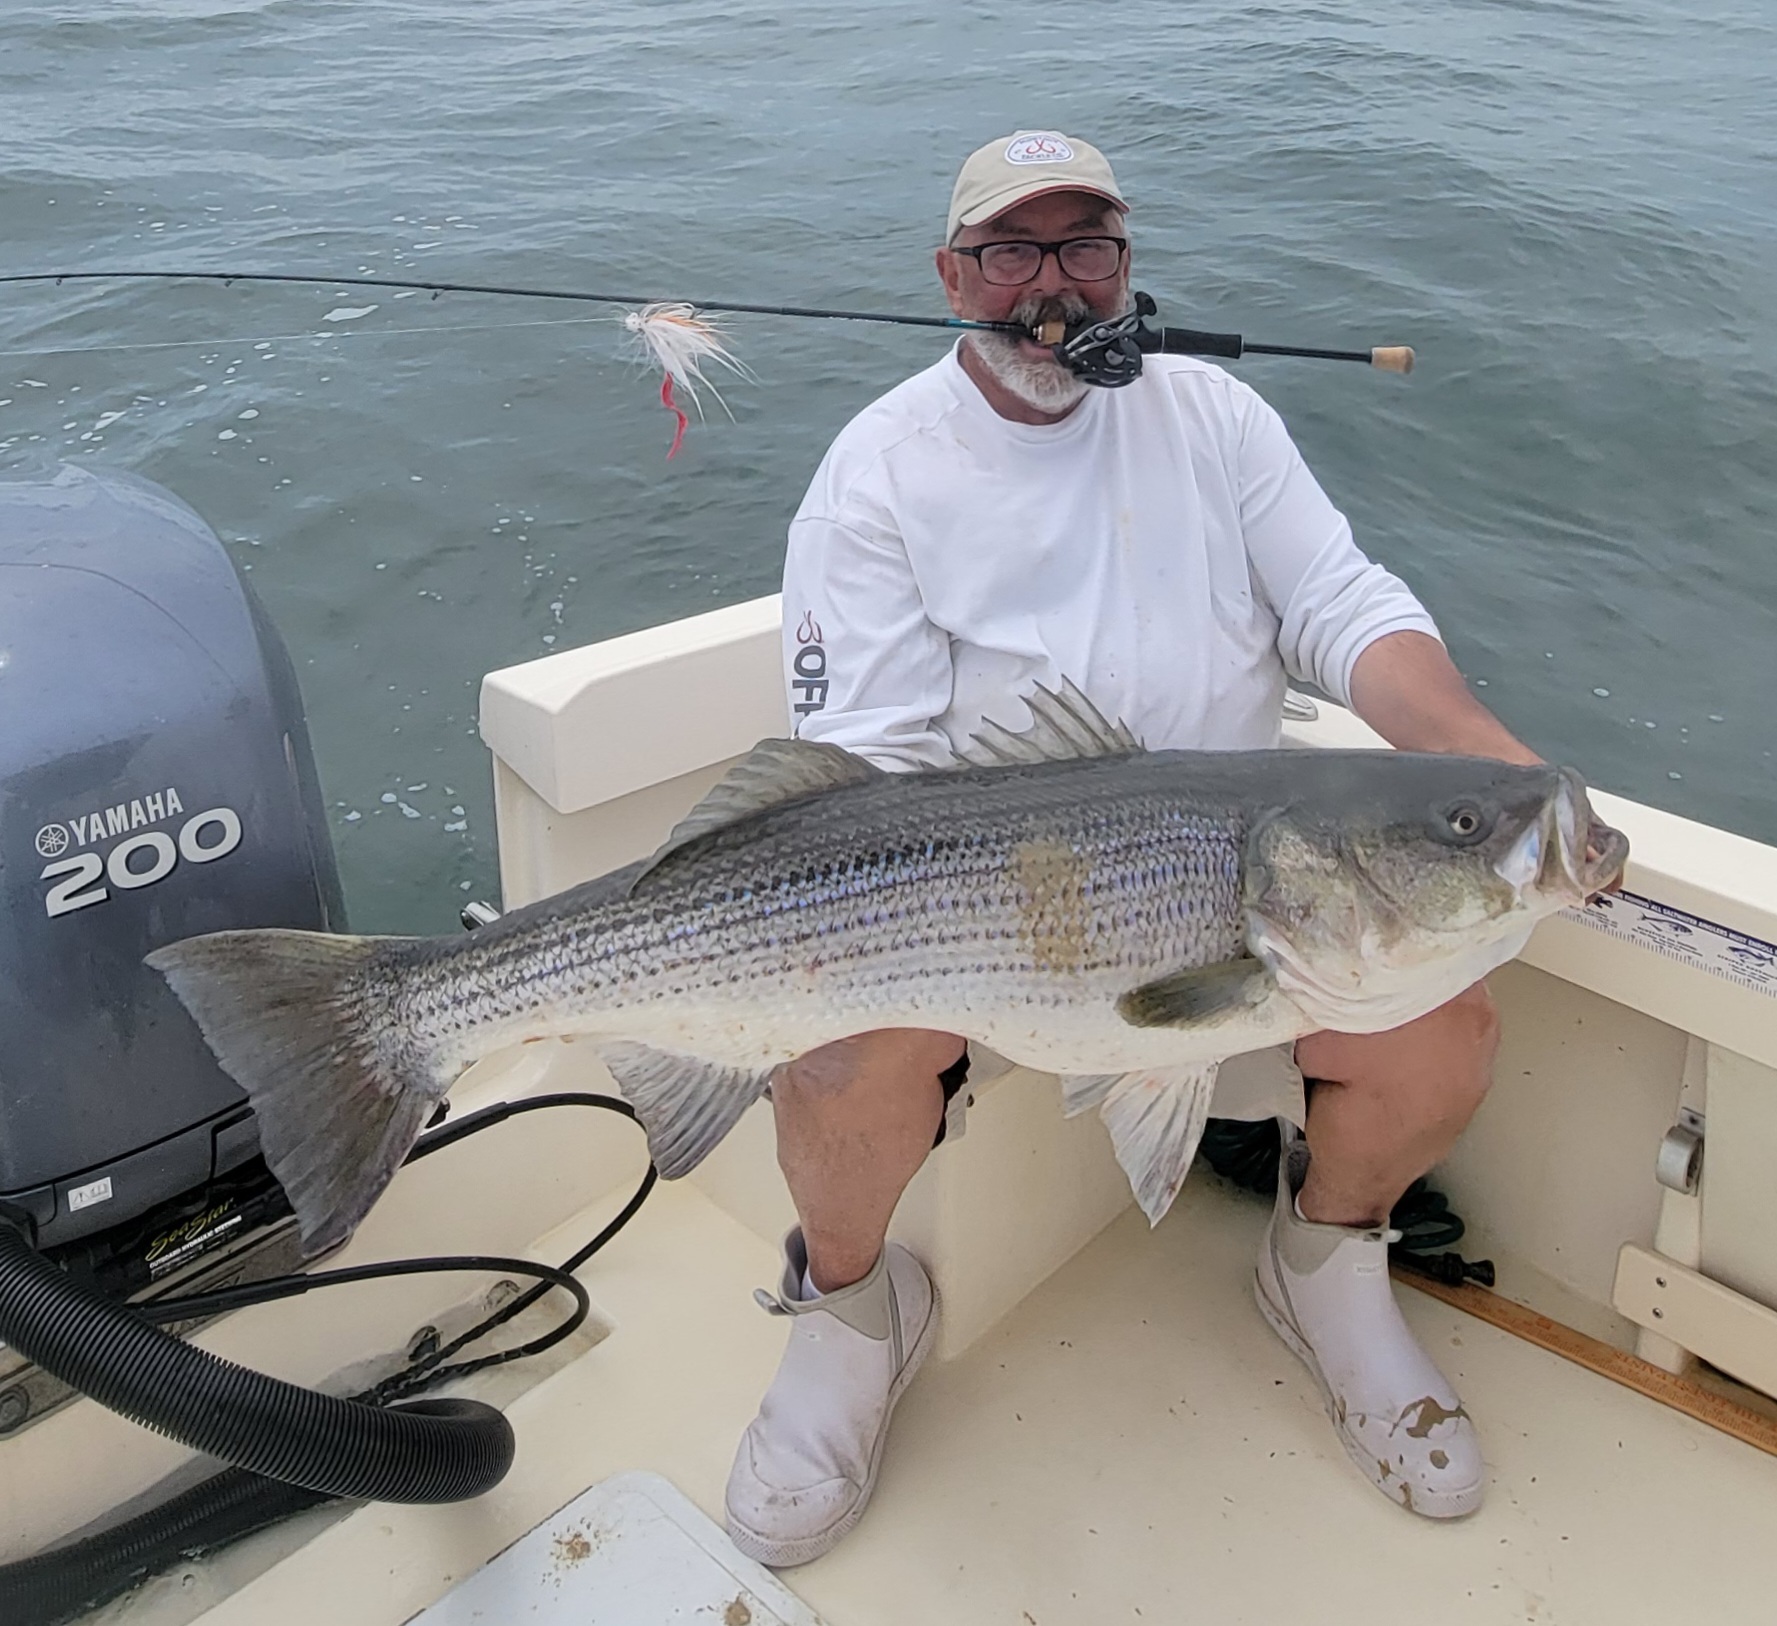 Capt. Savio Mizzi of Fish Hooker Charters with a monster Montauk striped bass caught over the weekend on light tackle.